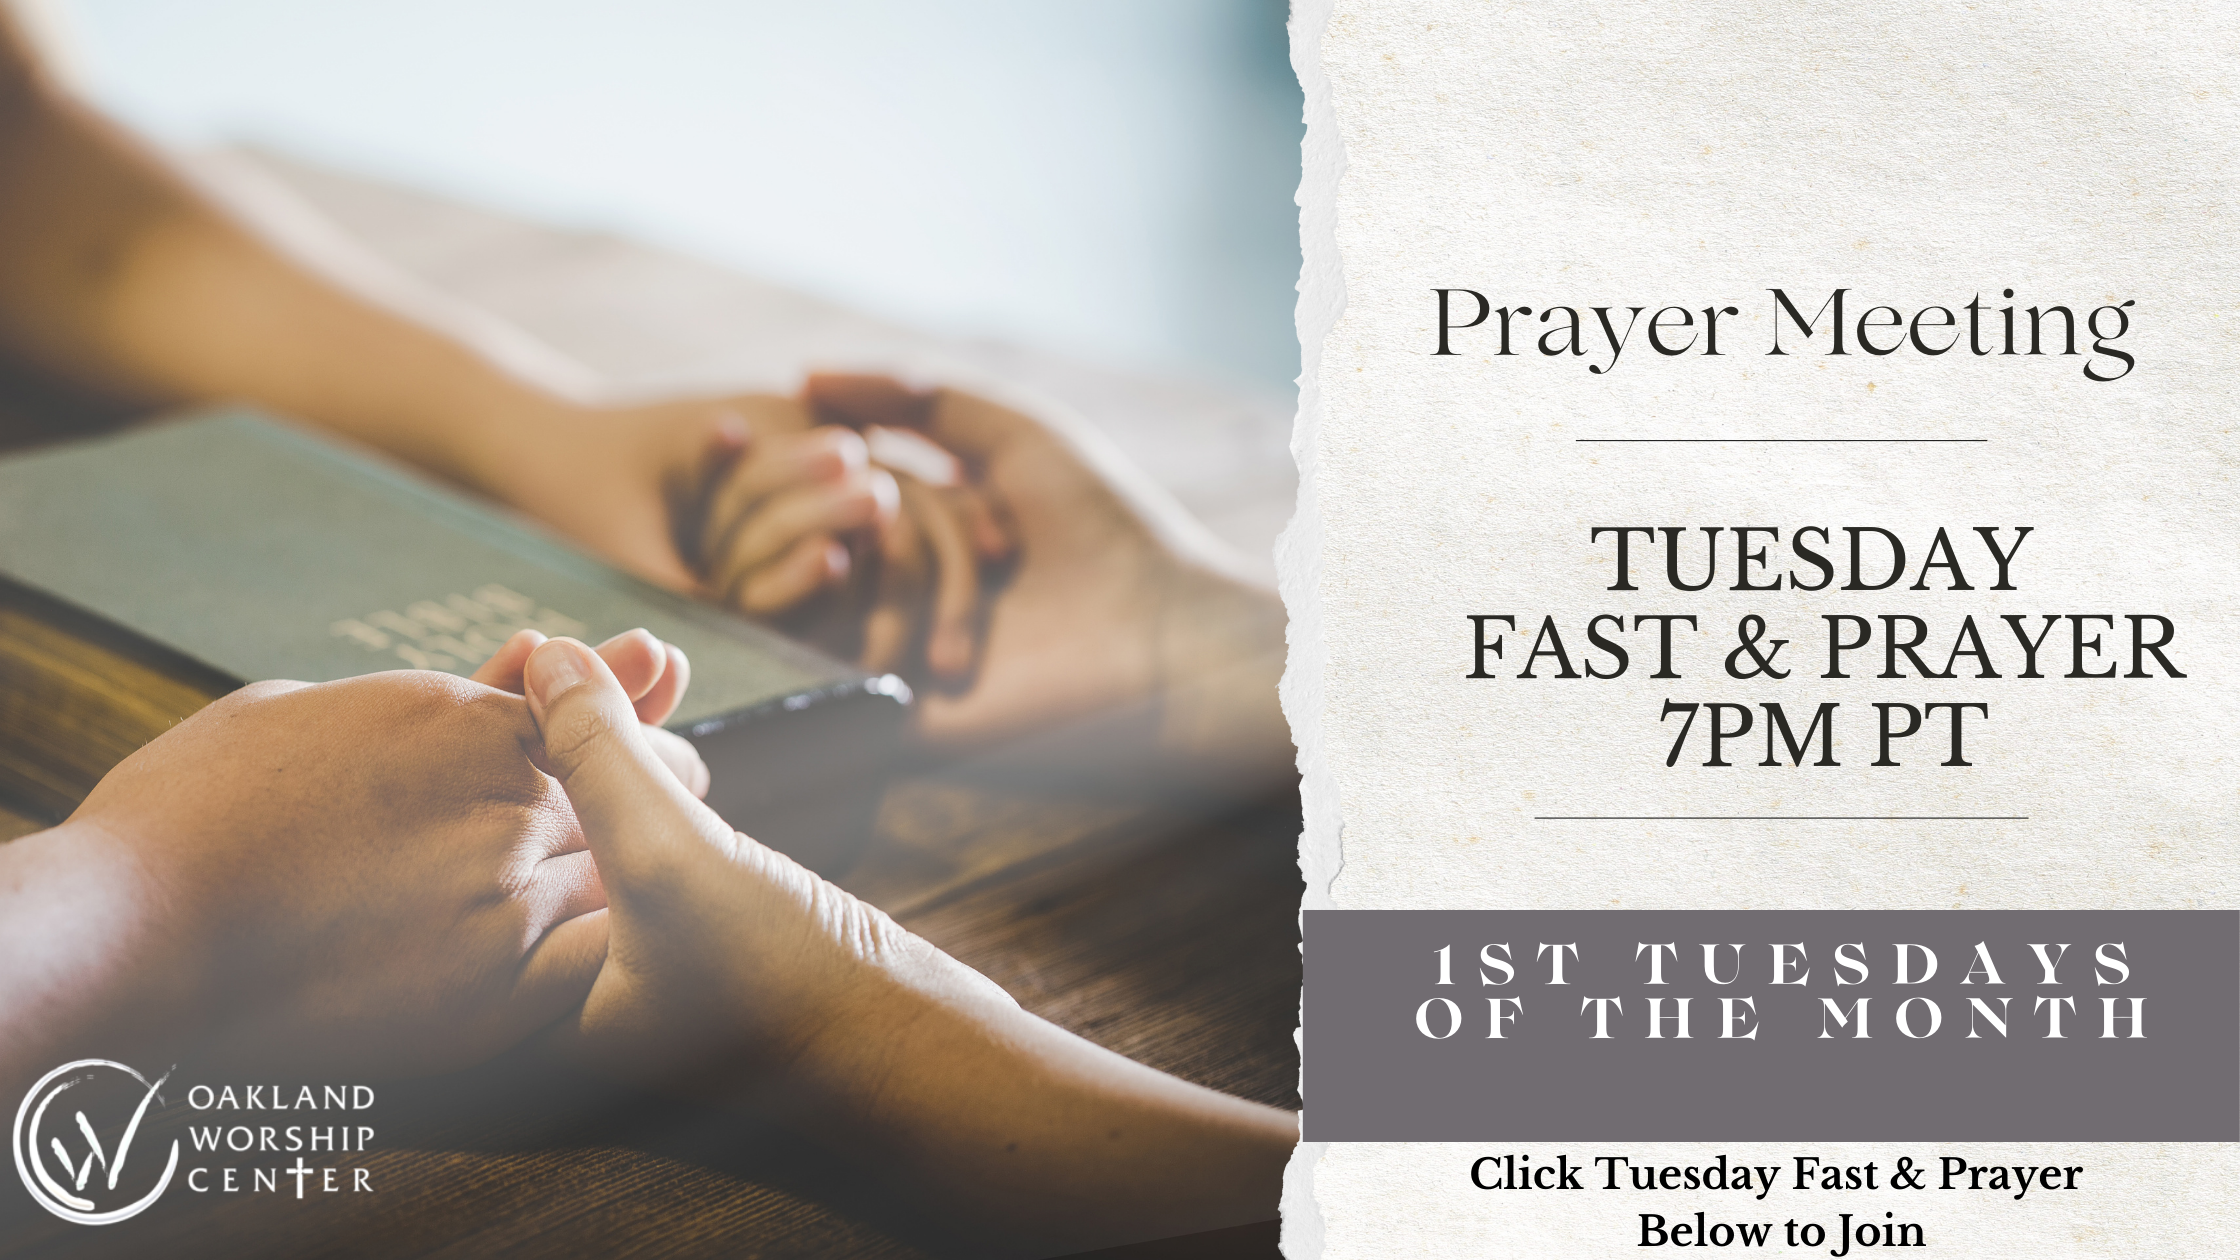 Click Tuesday Fast & Pray Below to Join